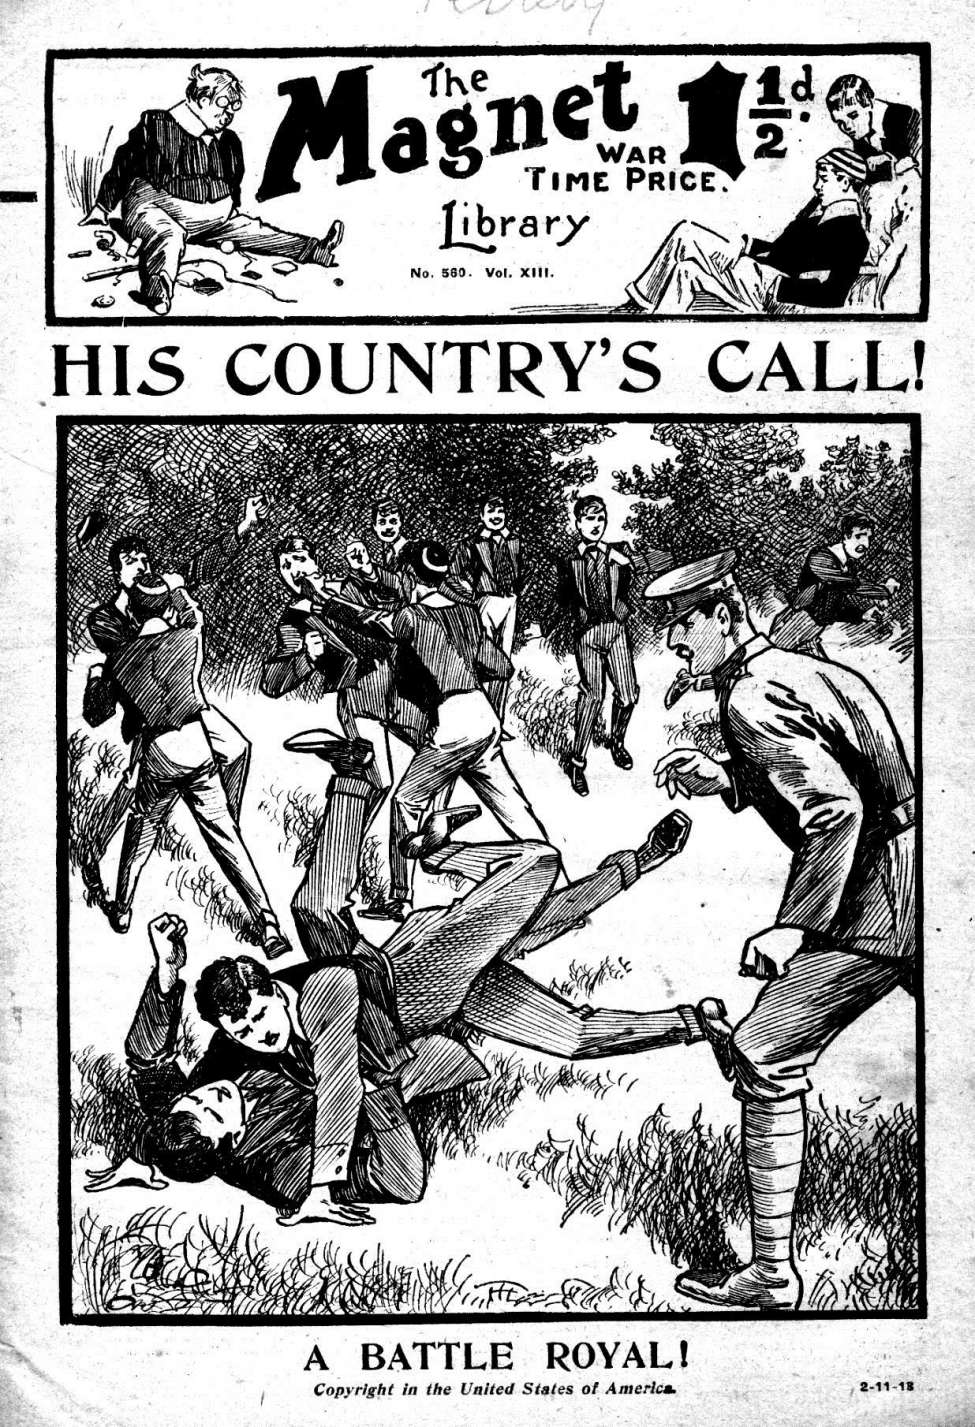 Book Cover For The Magnet 560 - His Country's Call!